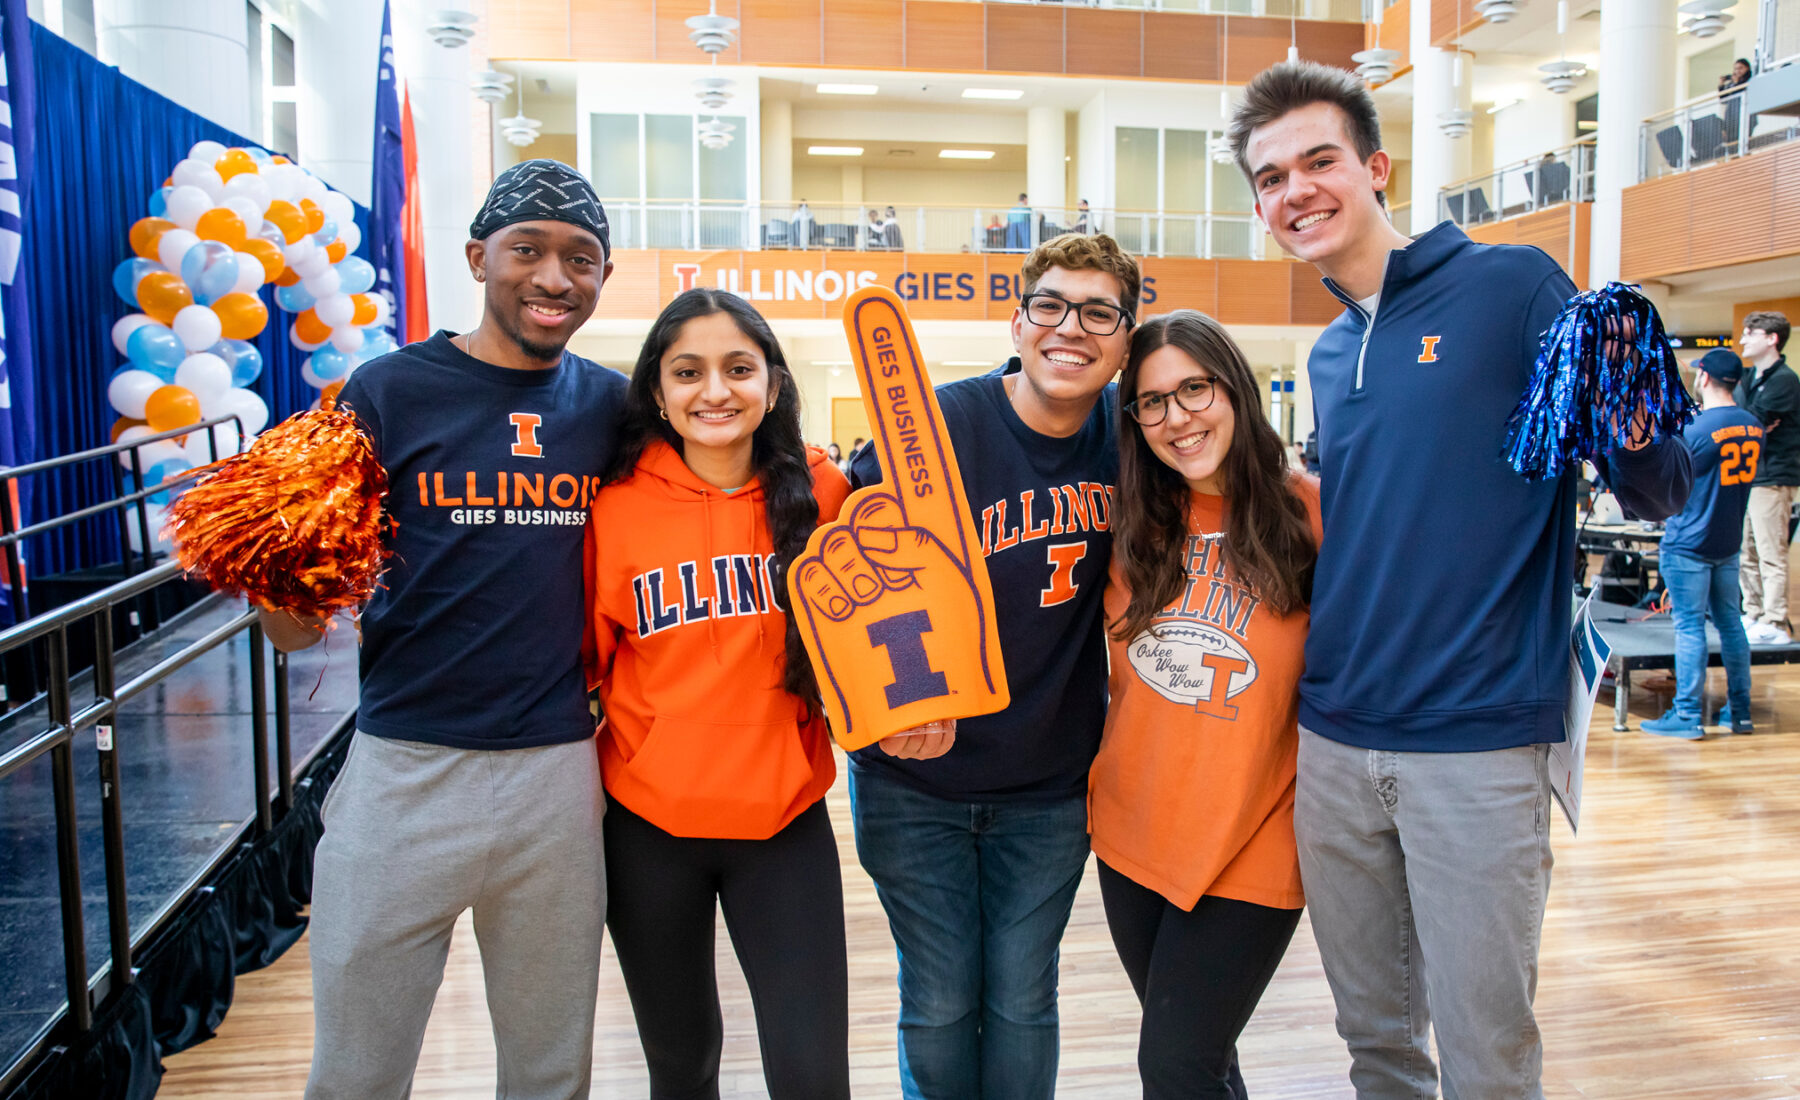 Students smiling inside of the Business building with Gies Illini Gear such as poms and foam fingers.